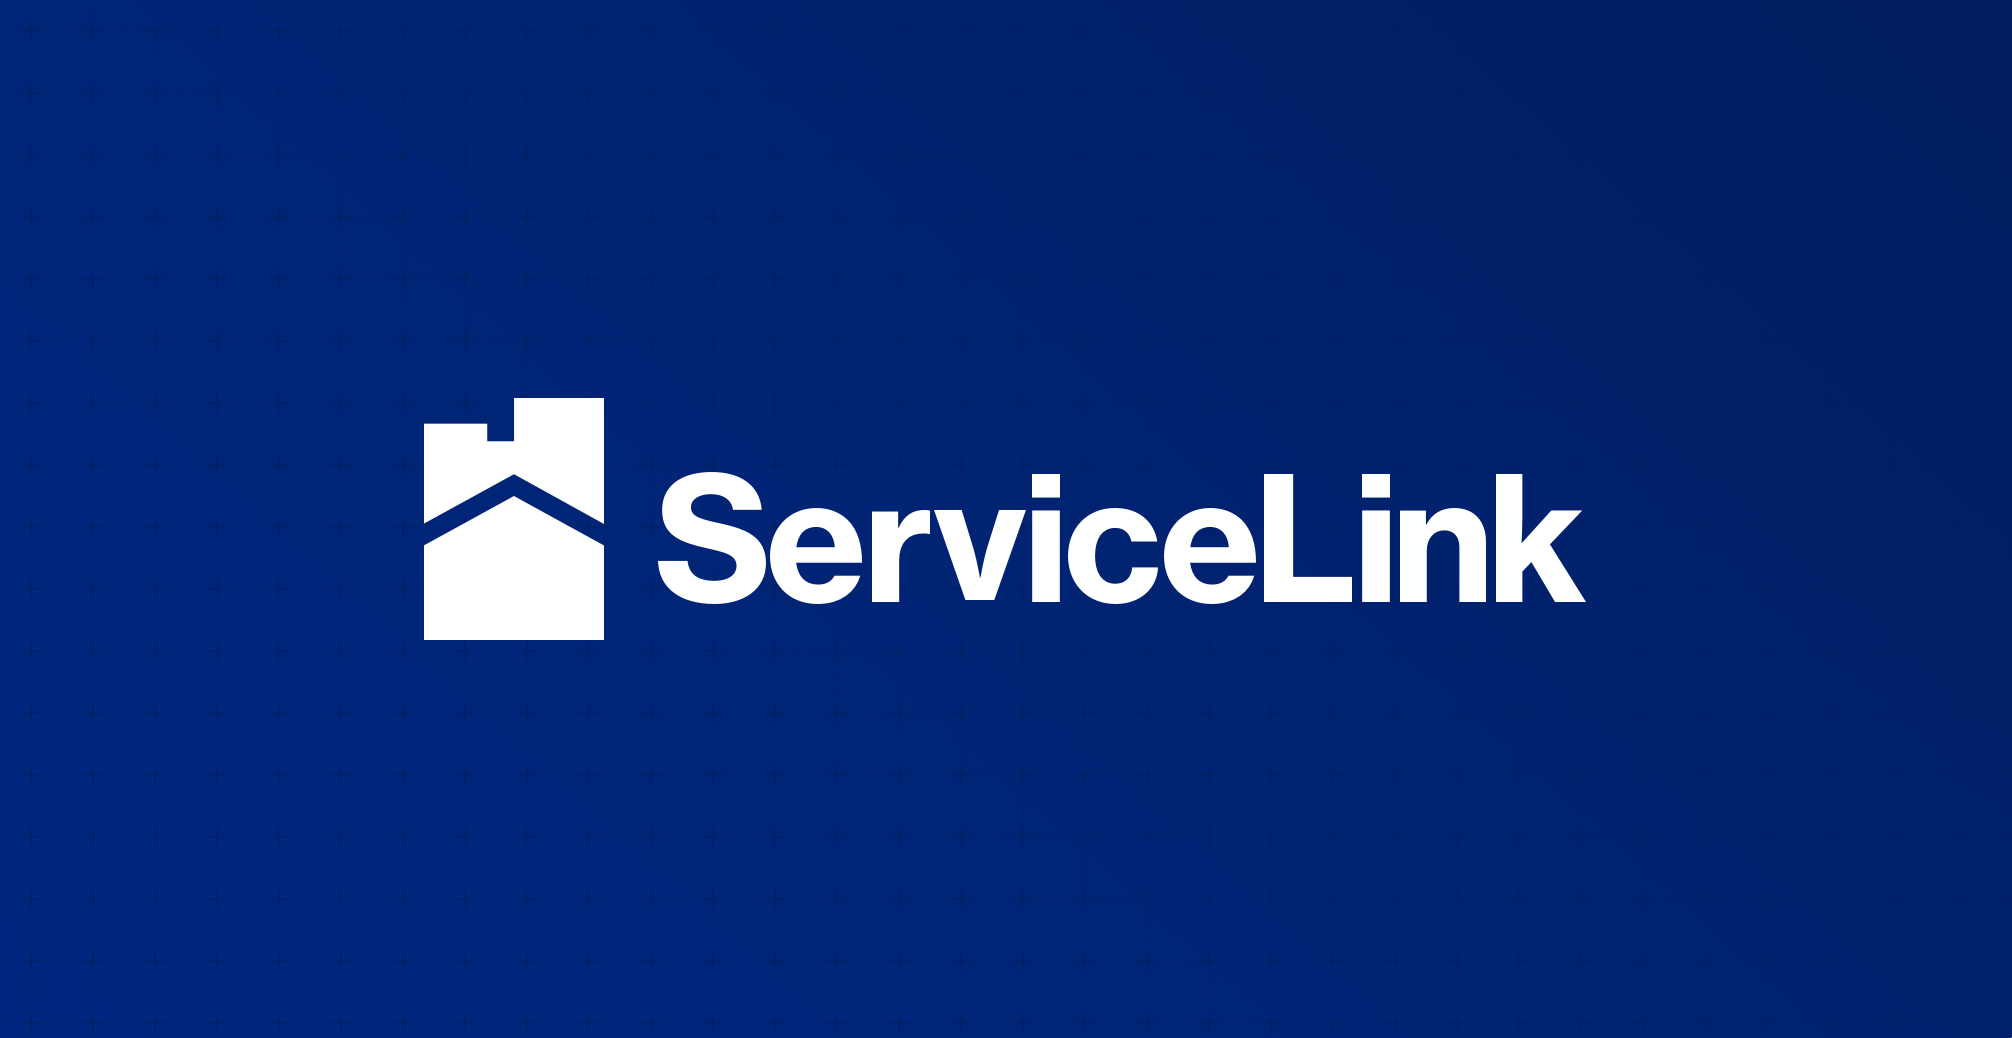 ServiceLink offers investors a complete suite of services